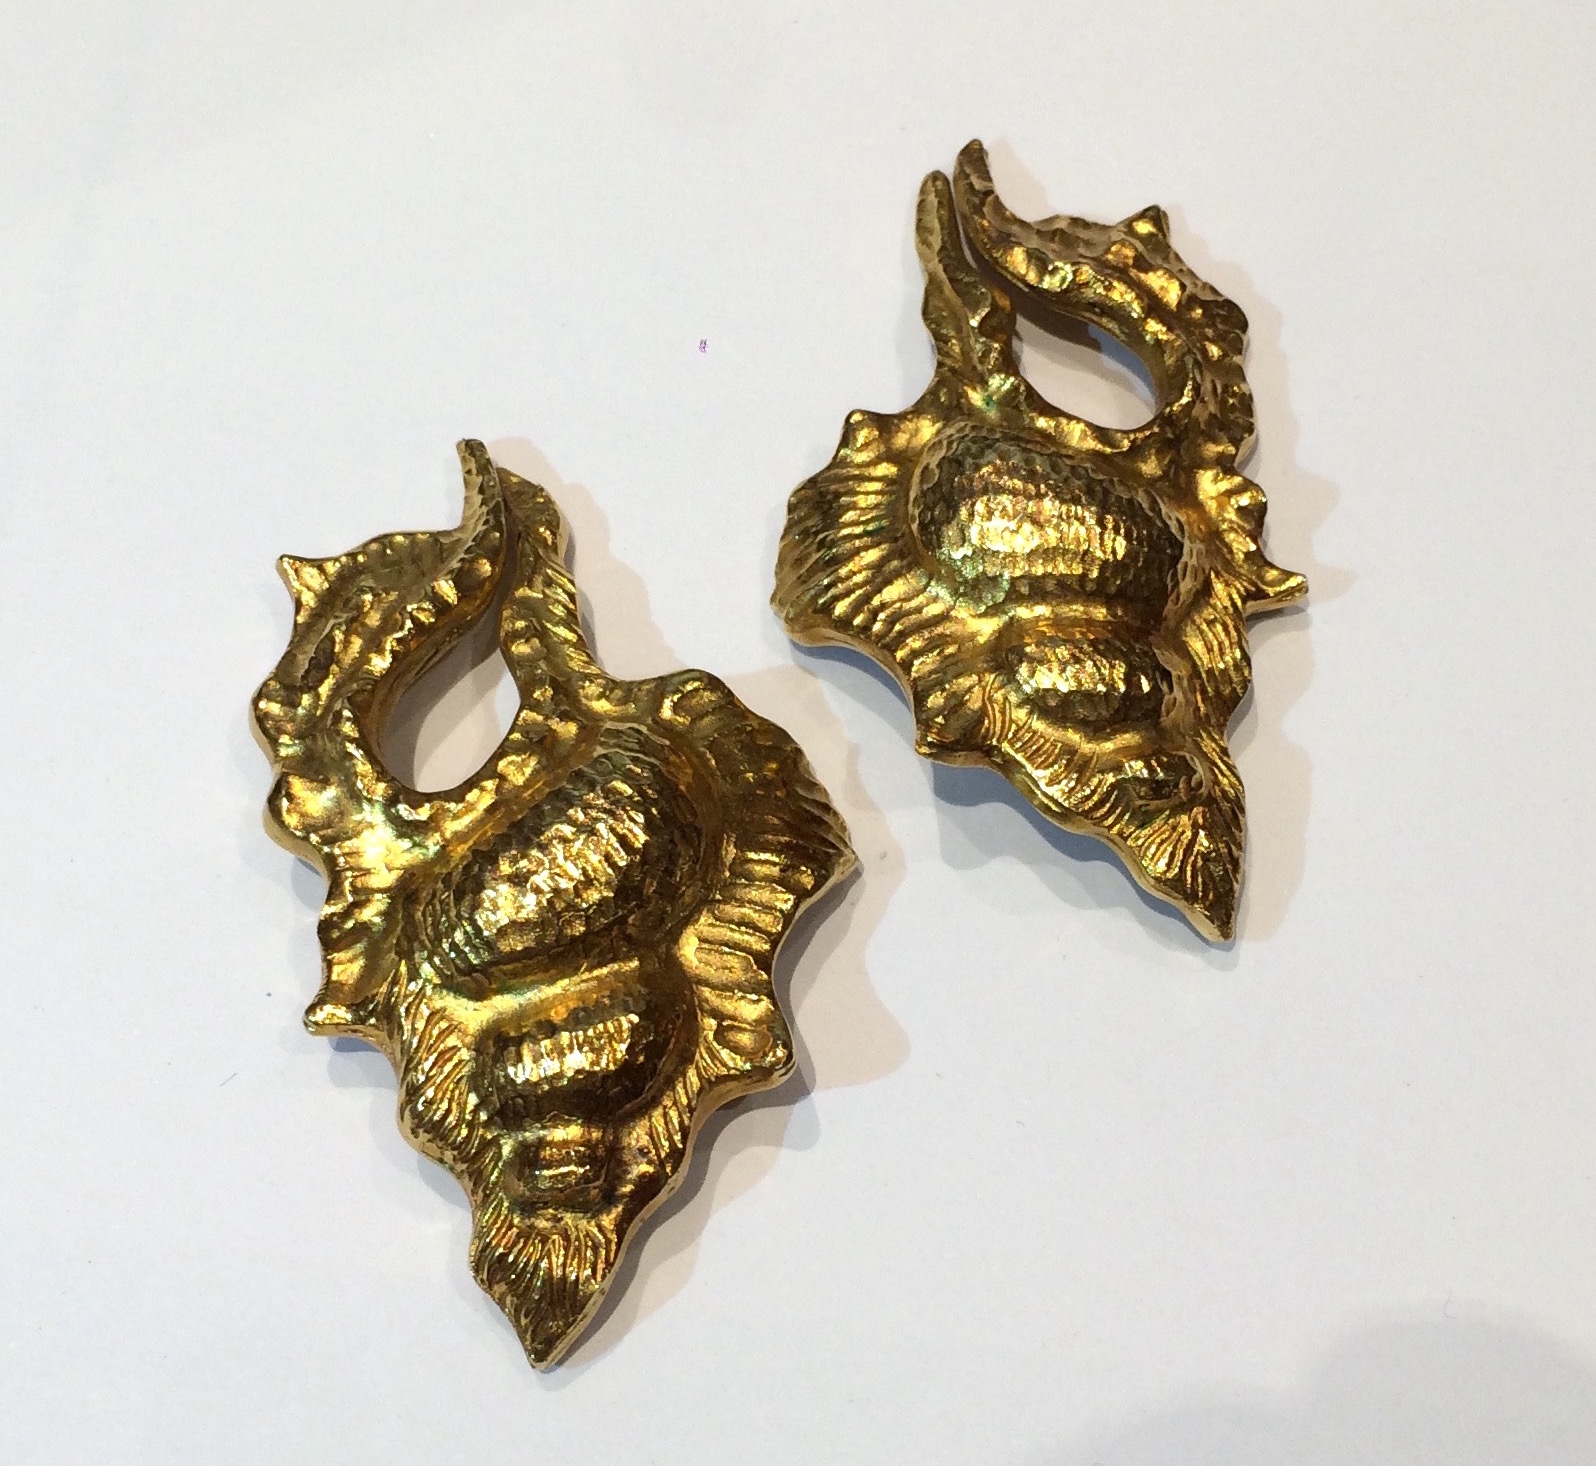 Ilias Lalaounis, Greece, “Shell” clip earrings in highly textured 18k gold, signed, c.1970’s